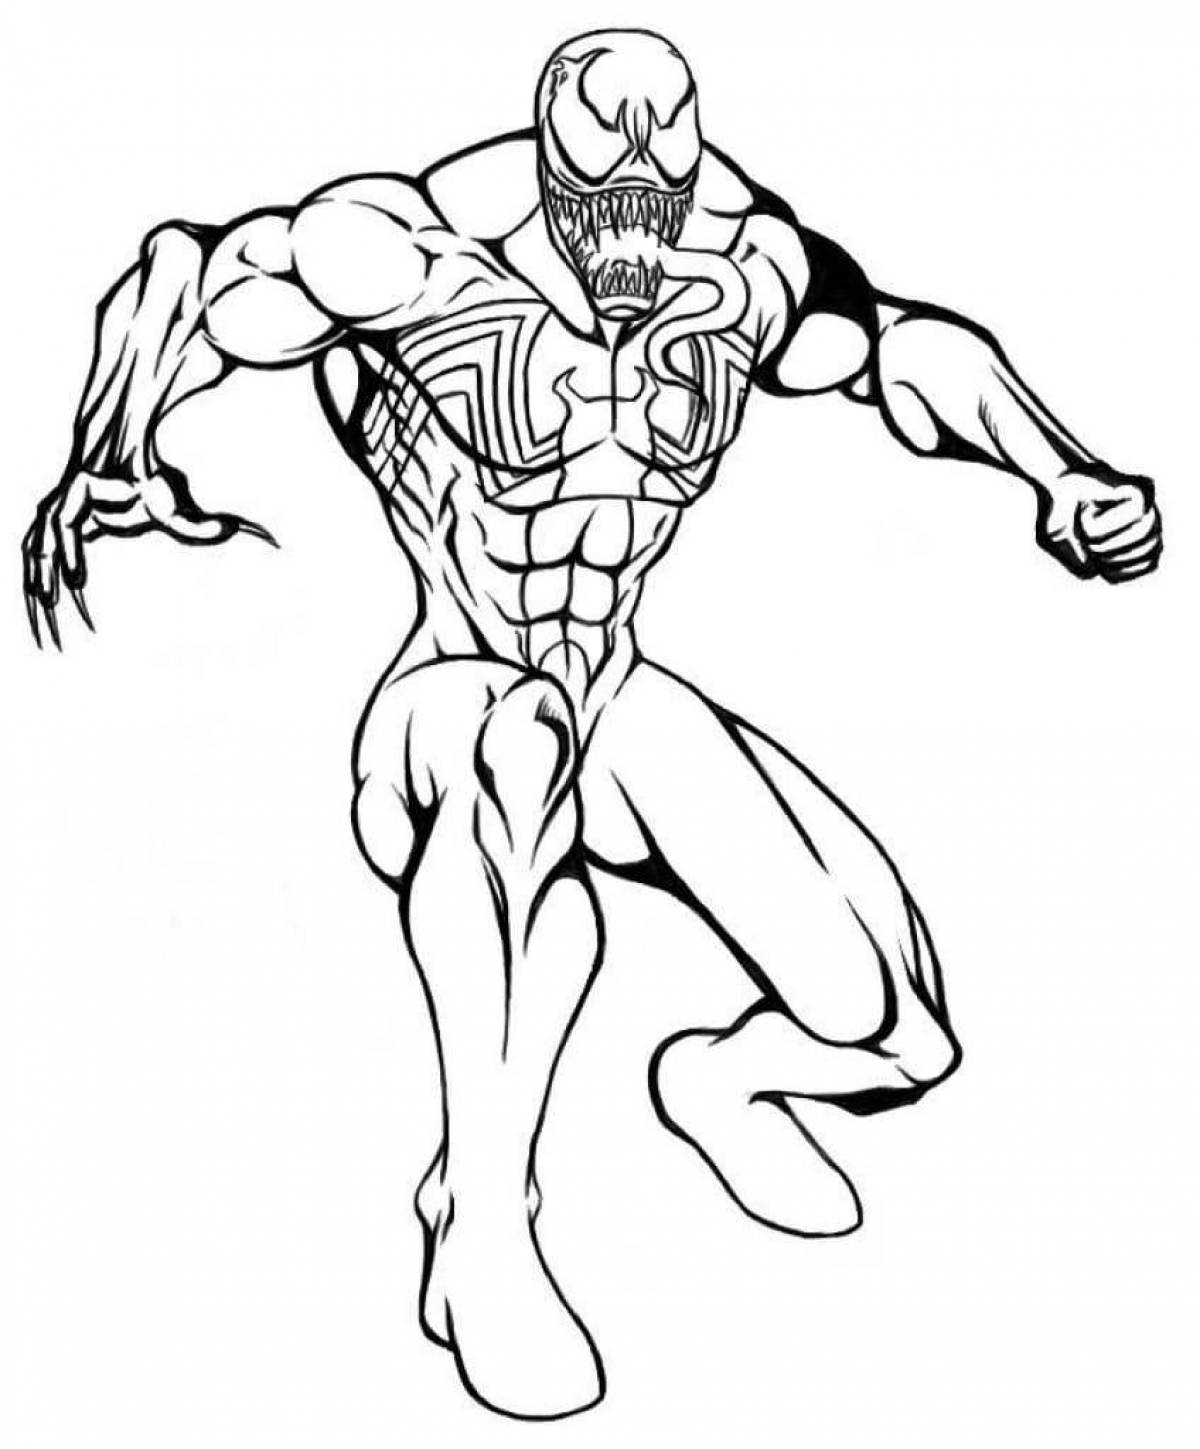 Outstanding venom coloring book for kids